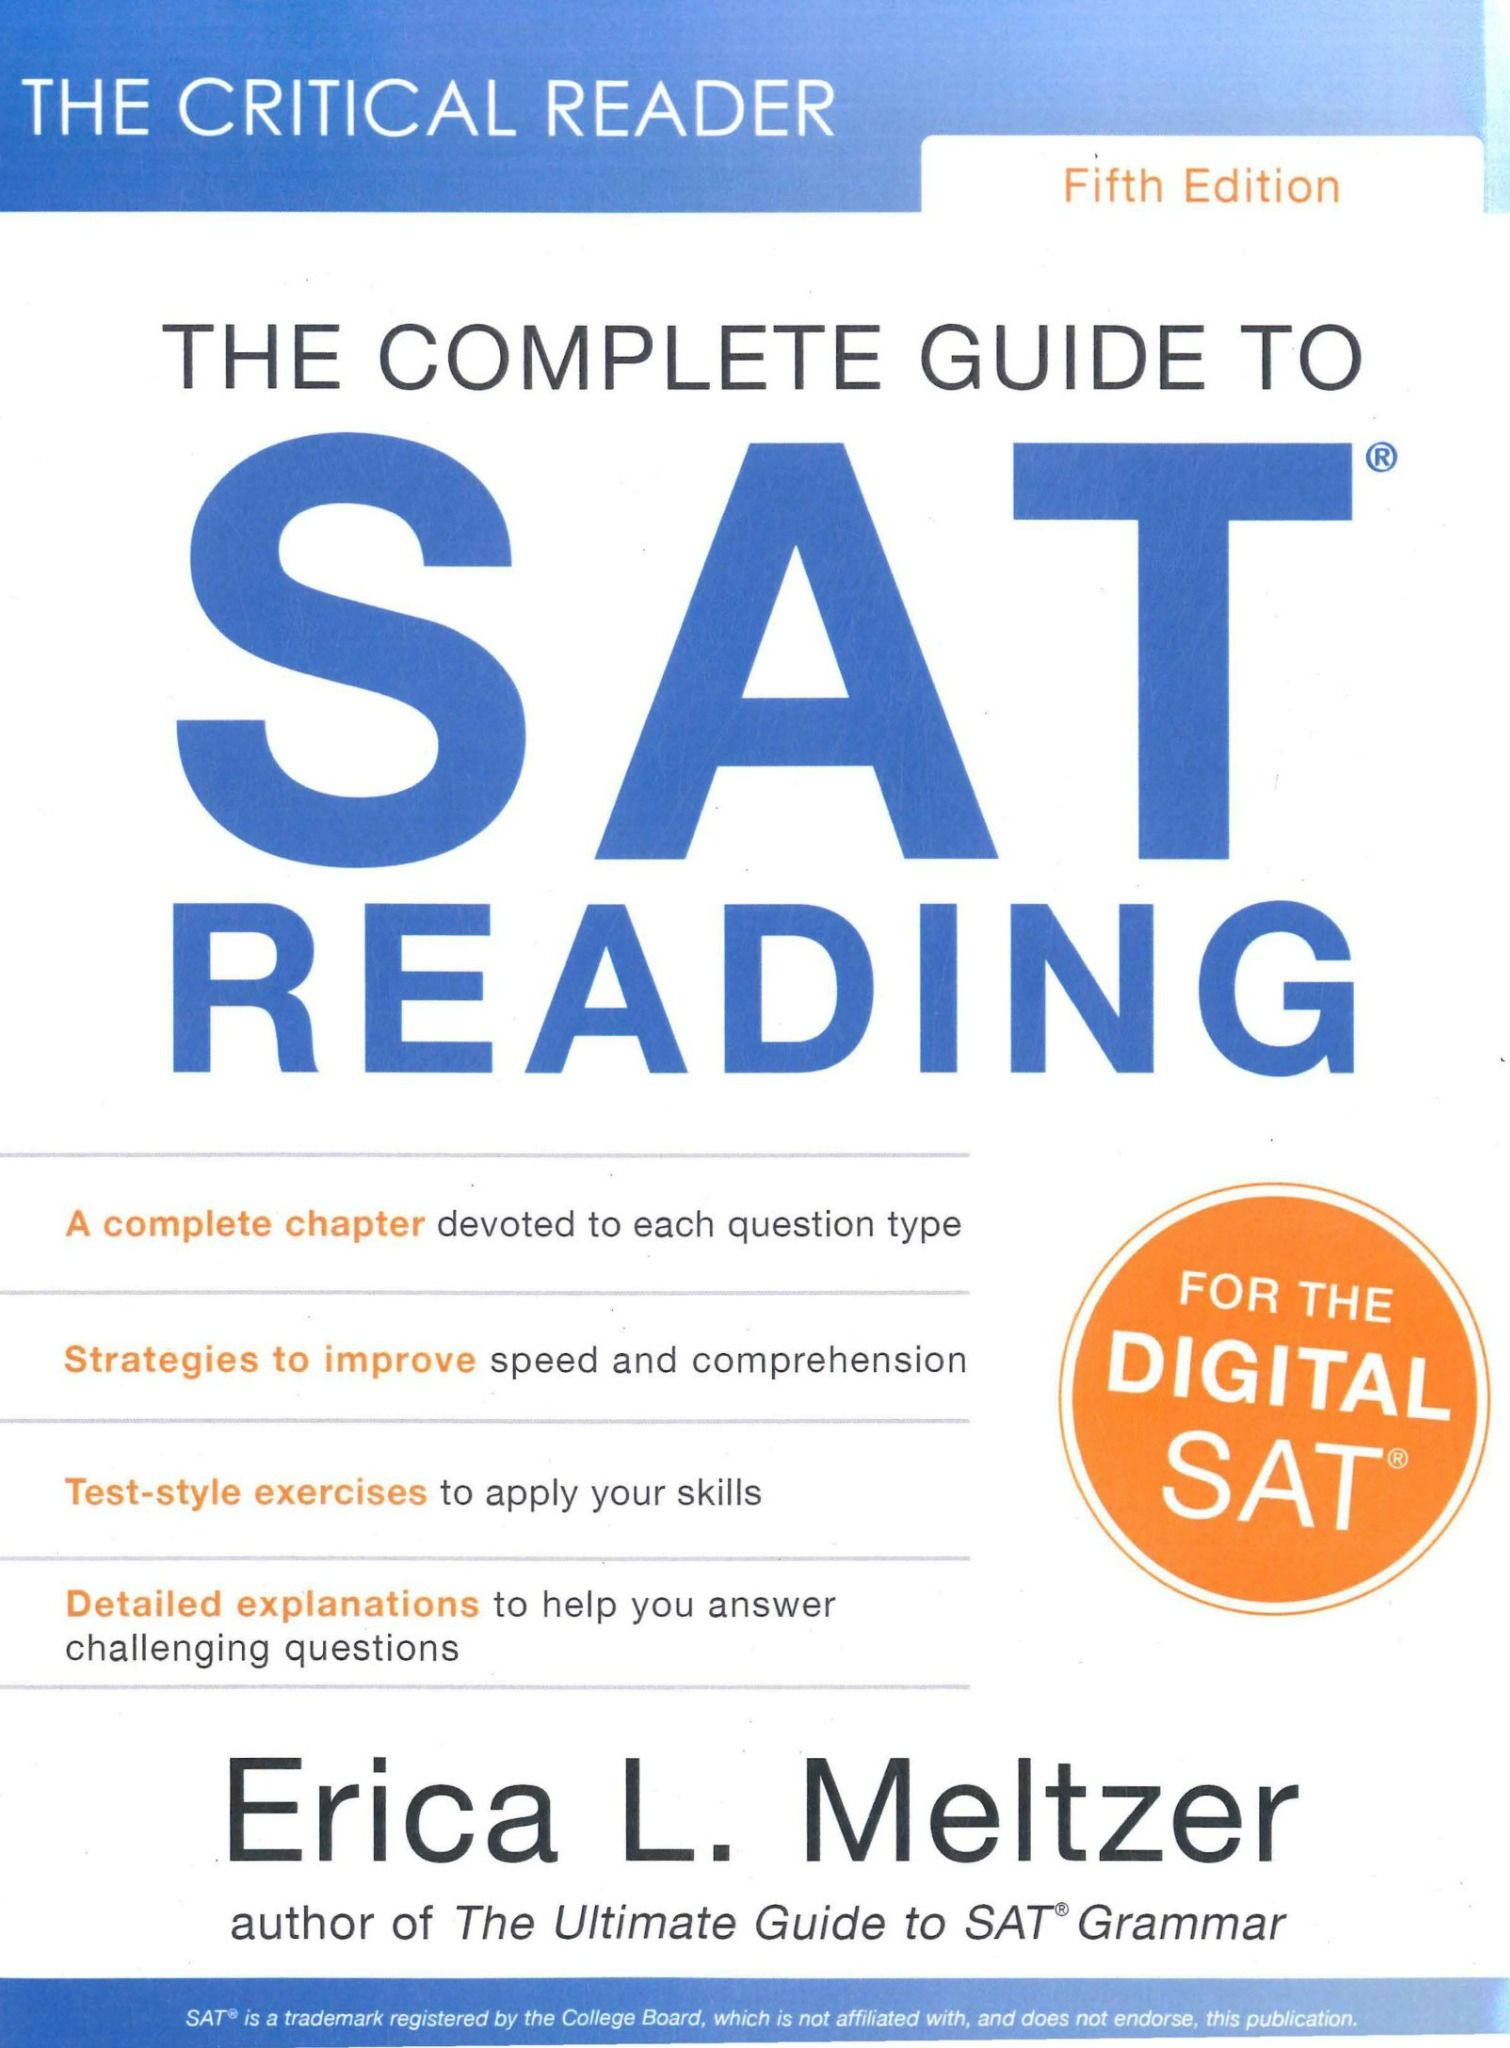 The Complete Guide to SAT Reading, 5th Edition for Digital SAT E